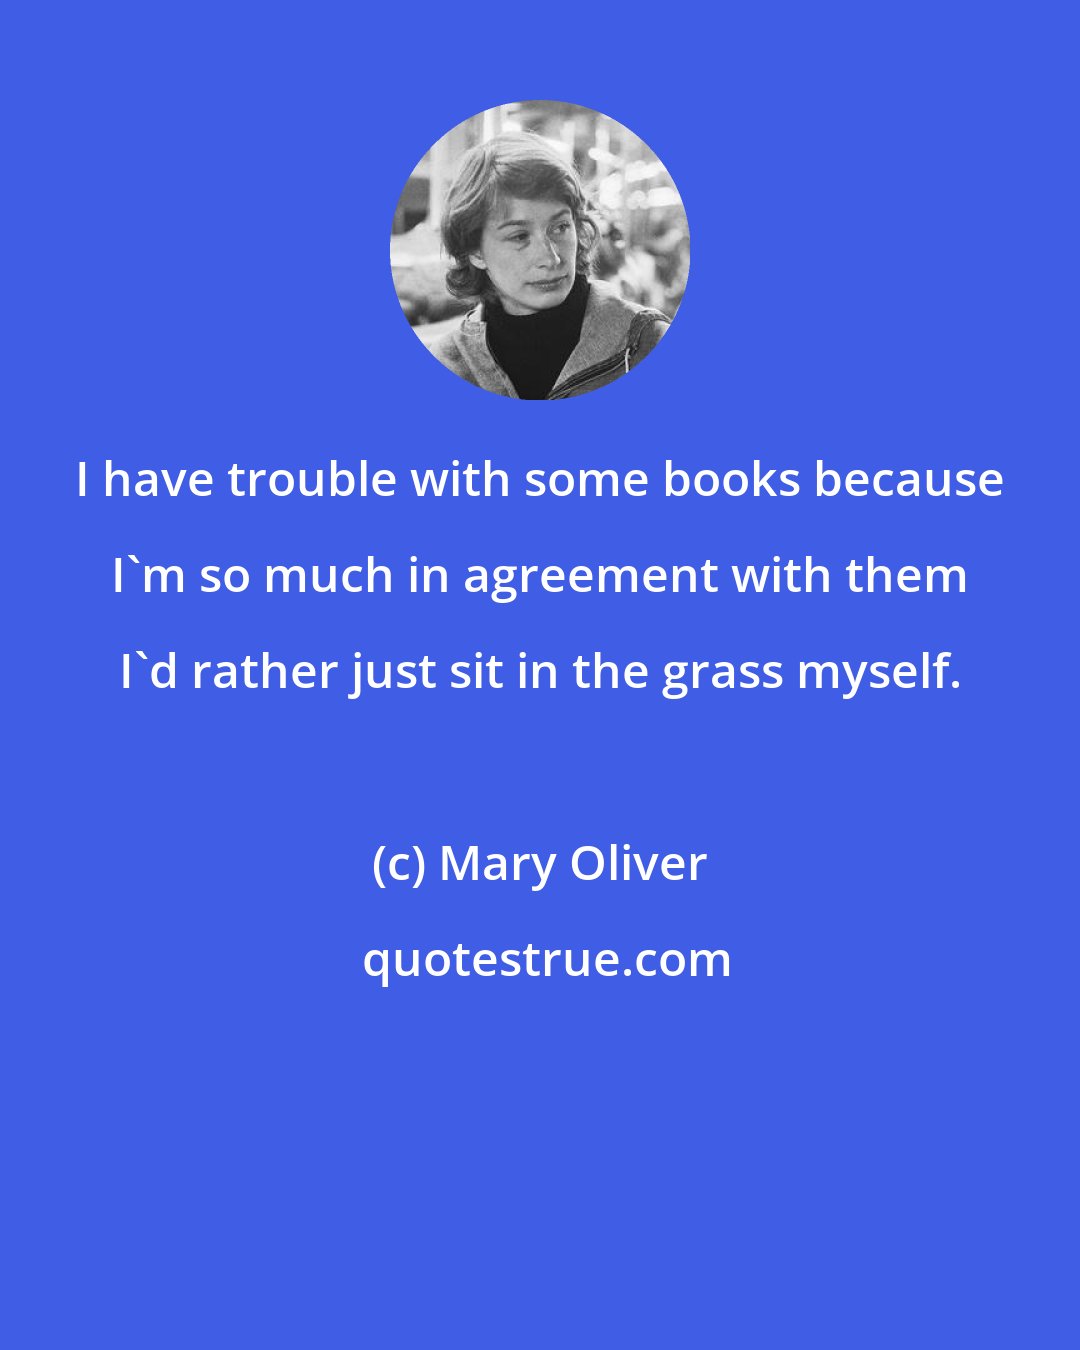 Mary Oliver: I have trouble with some books because I'm so much in agreement with them I'd rather just sit in the grass myself.